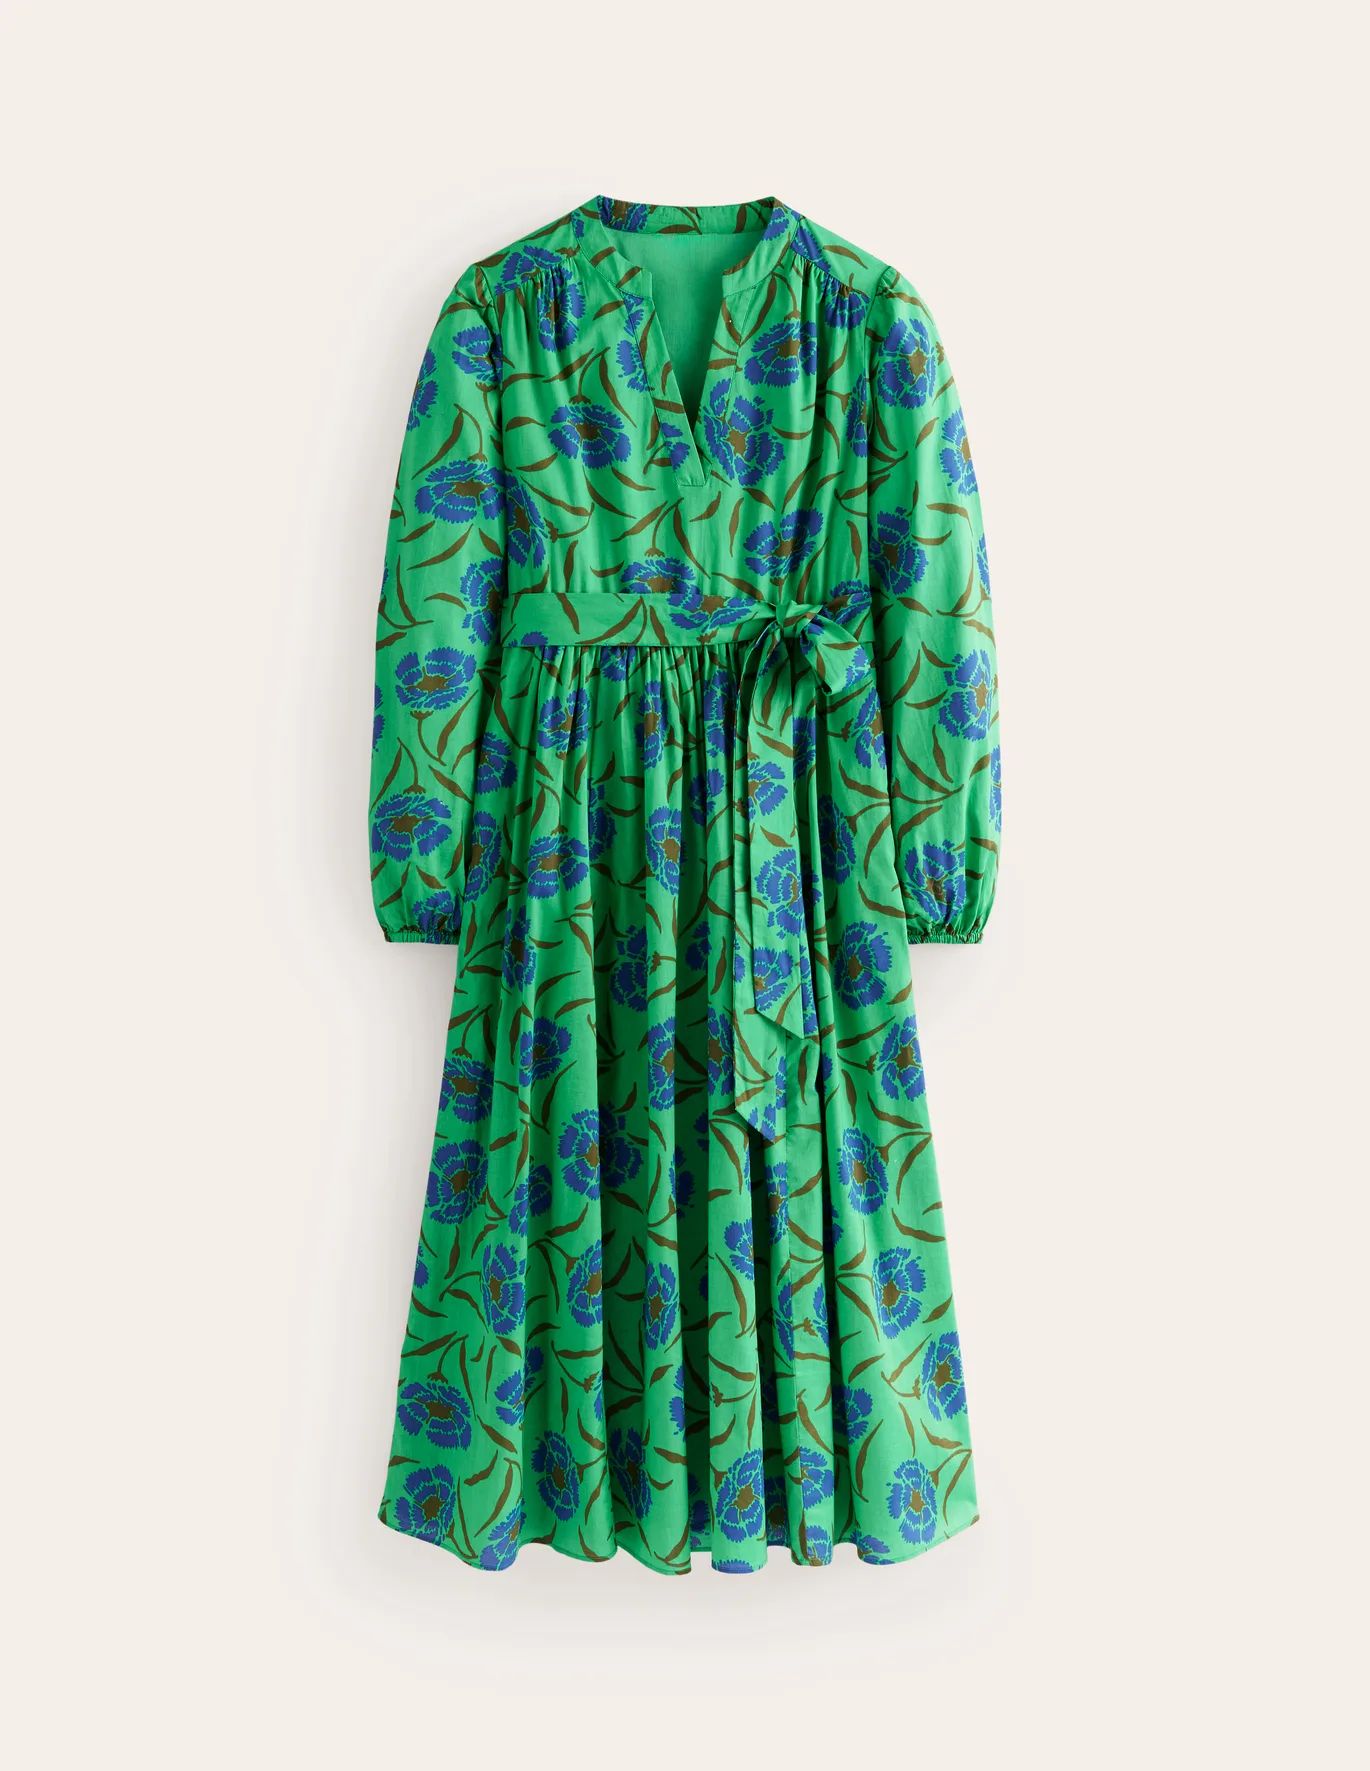 Ming Green, Peony Sprig | Boden (US)